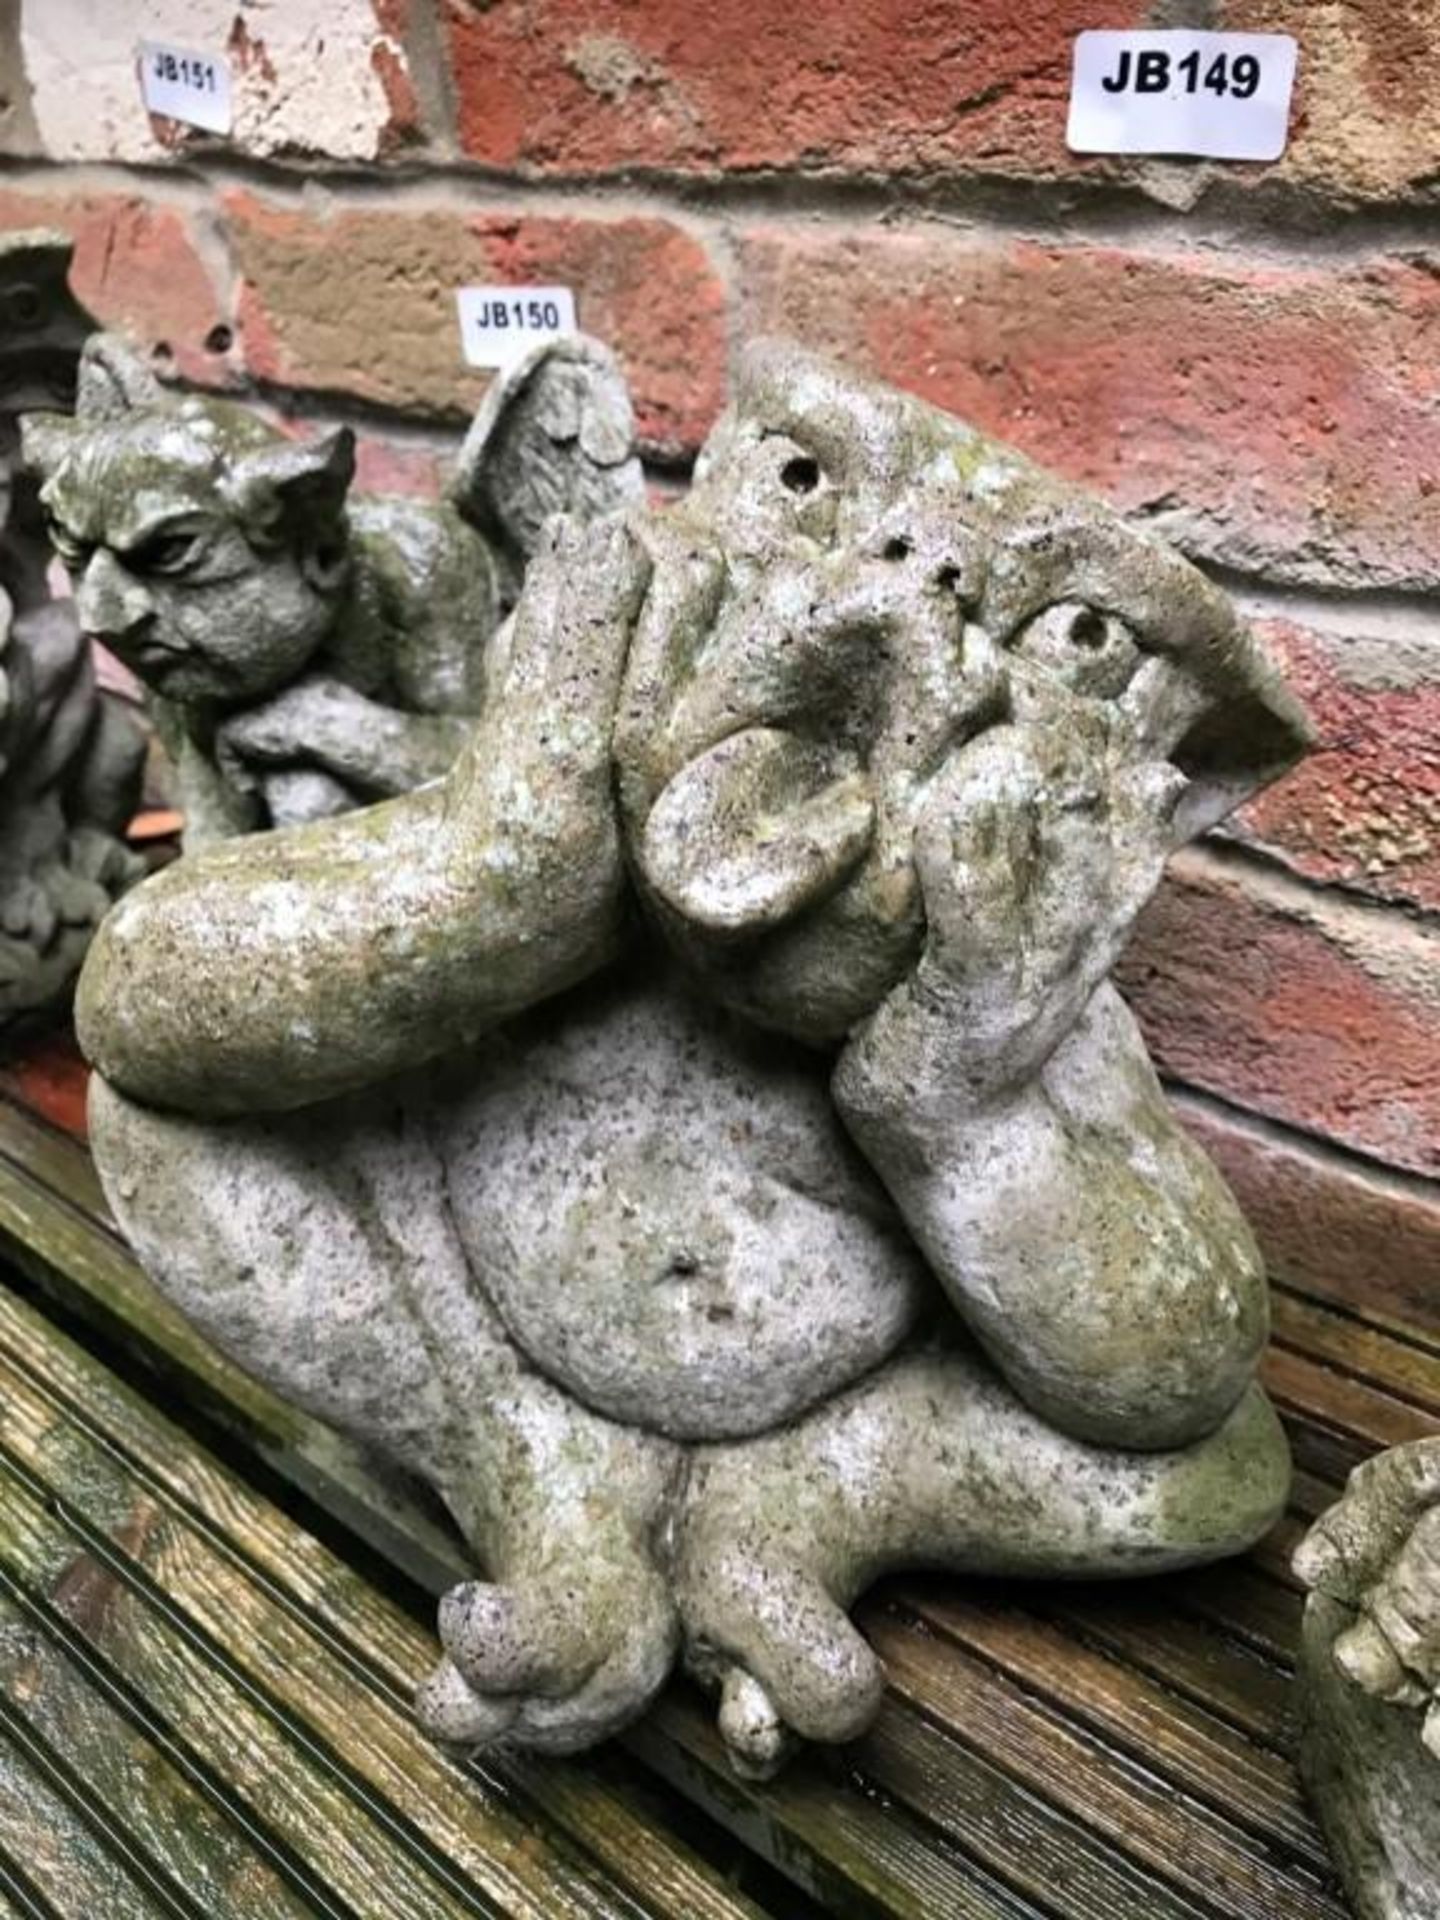 1 x Stone Gargoyle Character - Size Approx 20cm x 20cm - Ref: JB149 - Pre-Owned - NO VAT ON THE